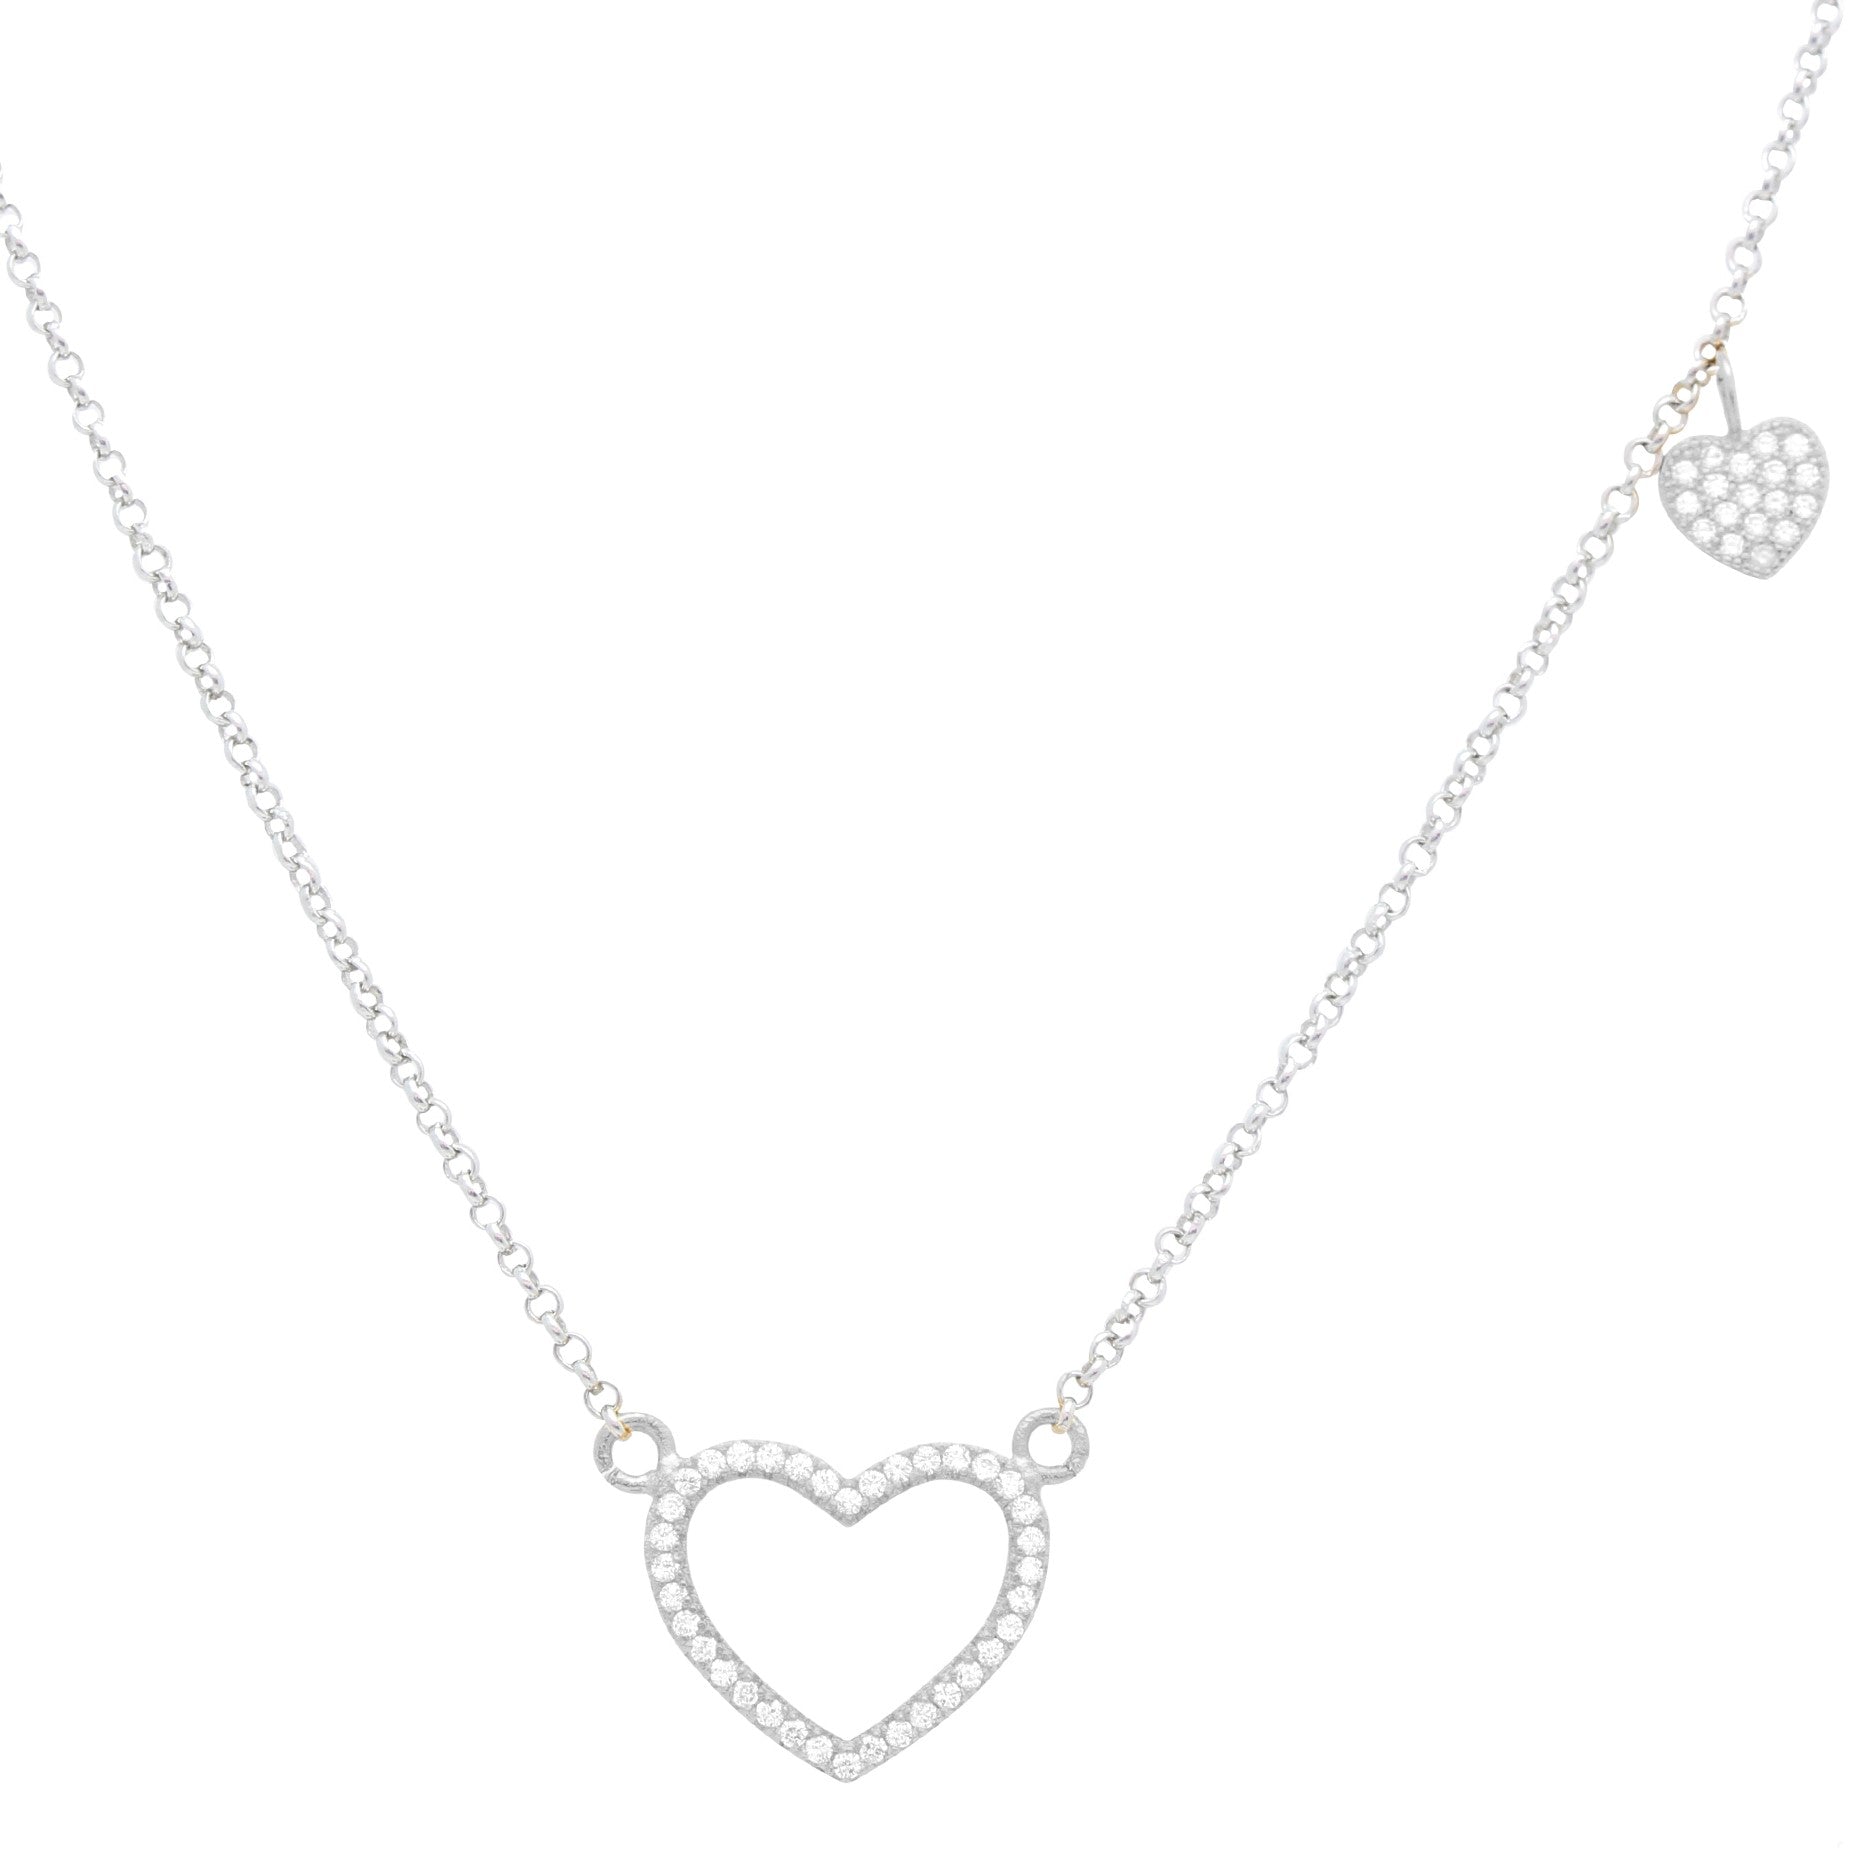 Sterling Silver 925 Open Heart Necklace Pendant Girls Teens Cubic Zirconia 15" Strong Rolo Chain ItalyÂ UnicornJ